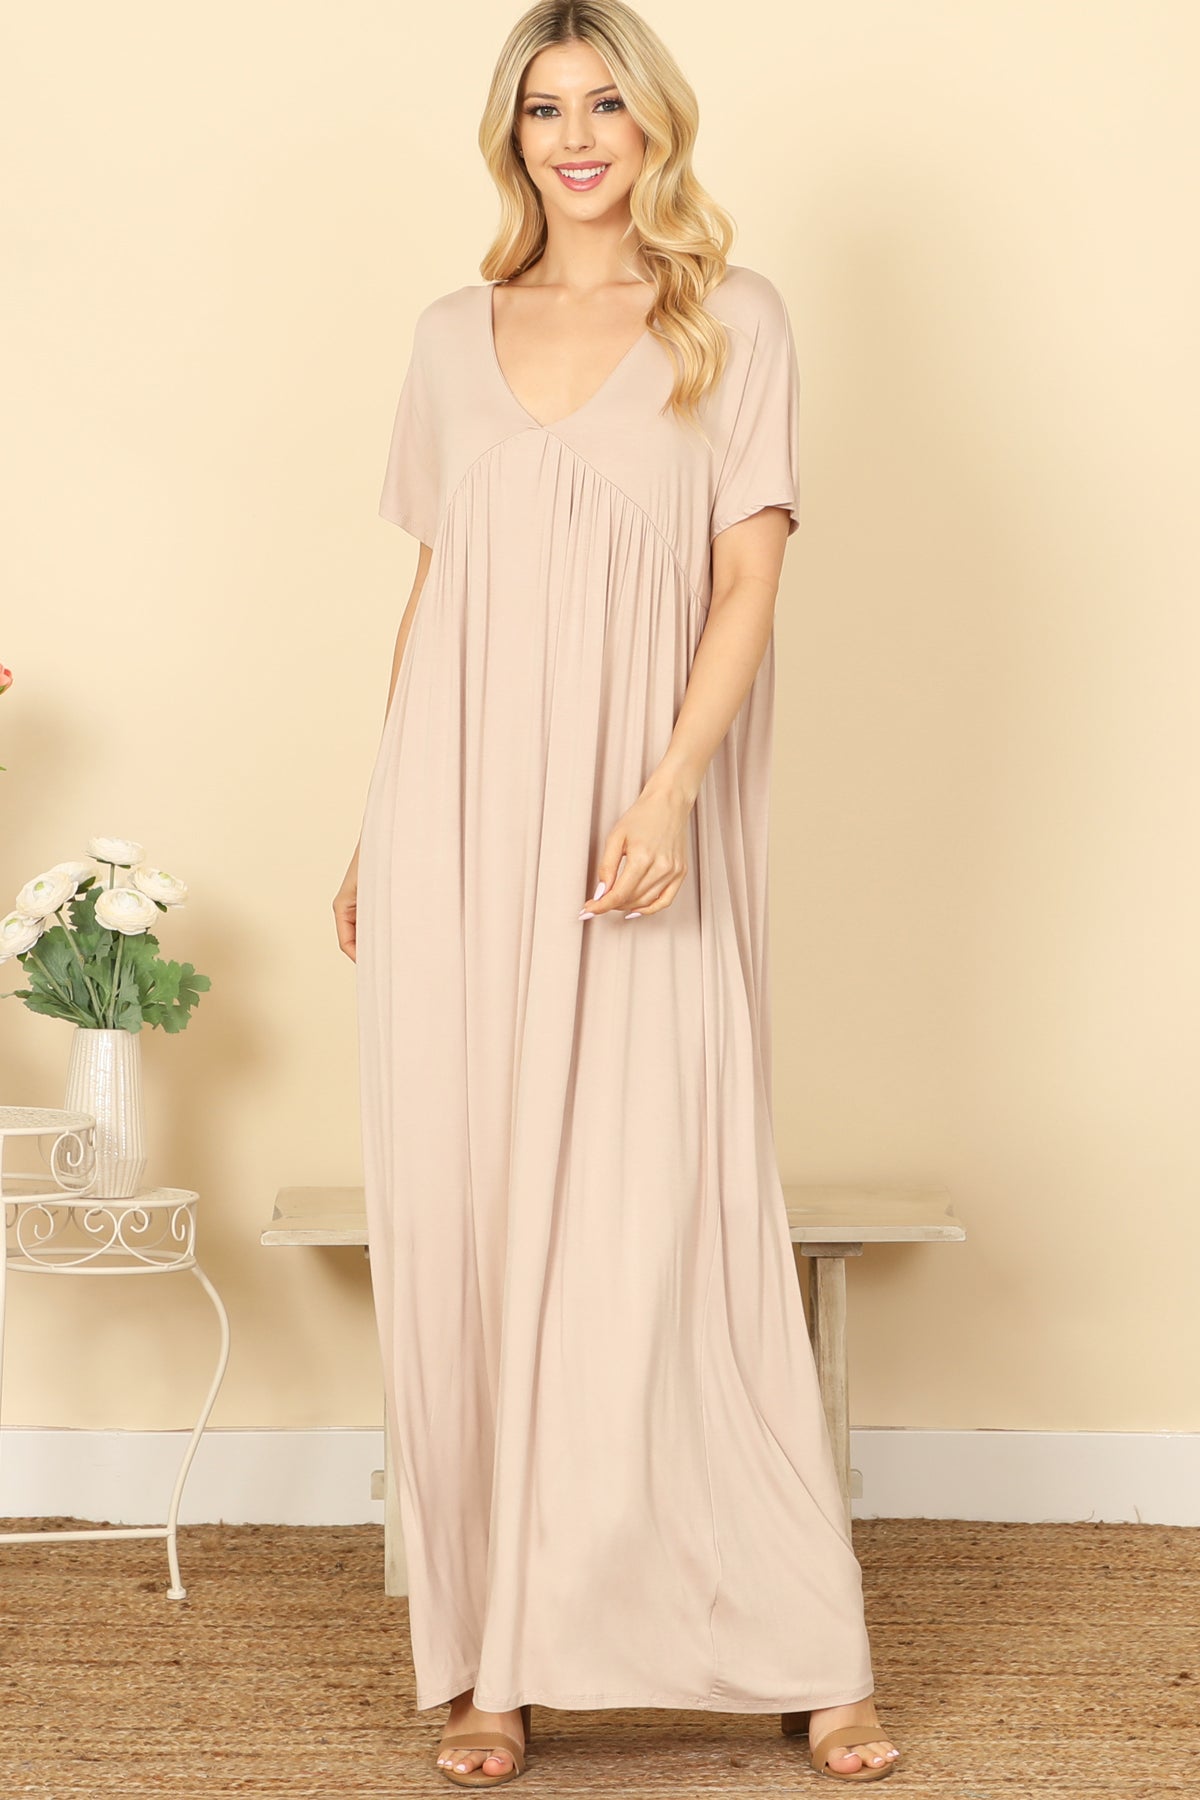 V-NECK SHORT SLEEVE PLEATED DETAIL SOLID MAXI DRESS 2-2-2-2